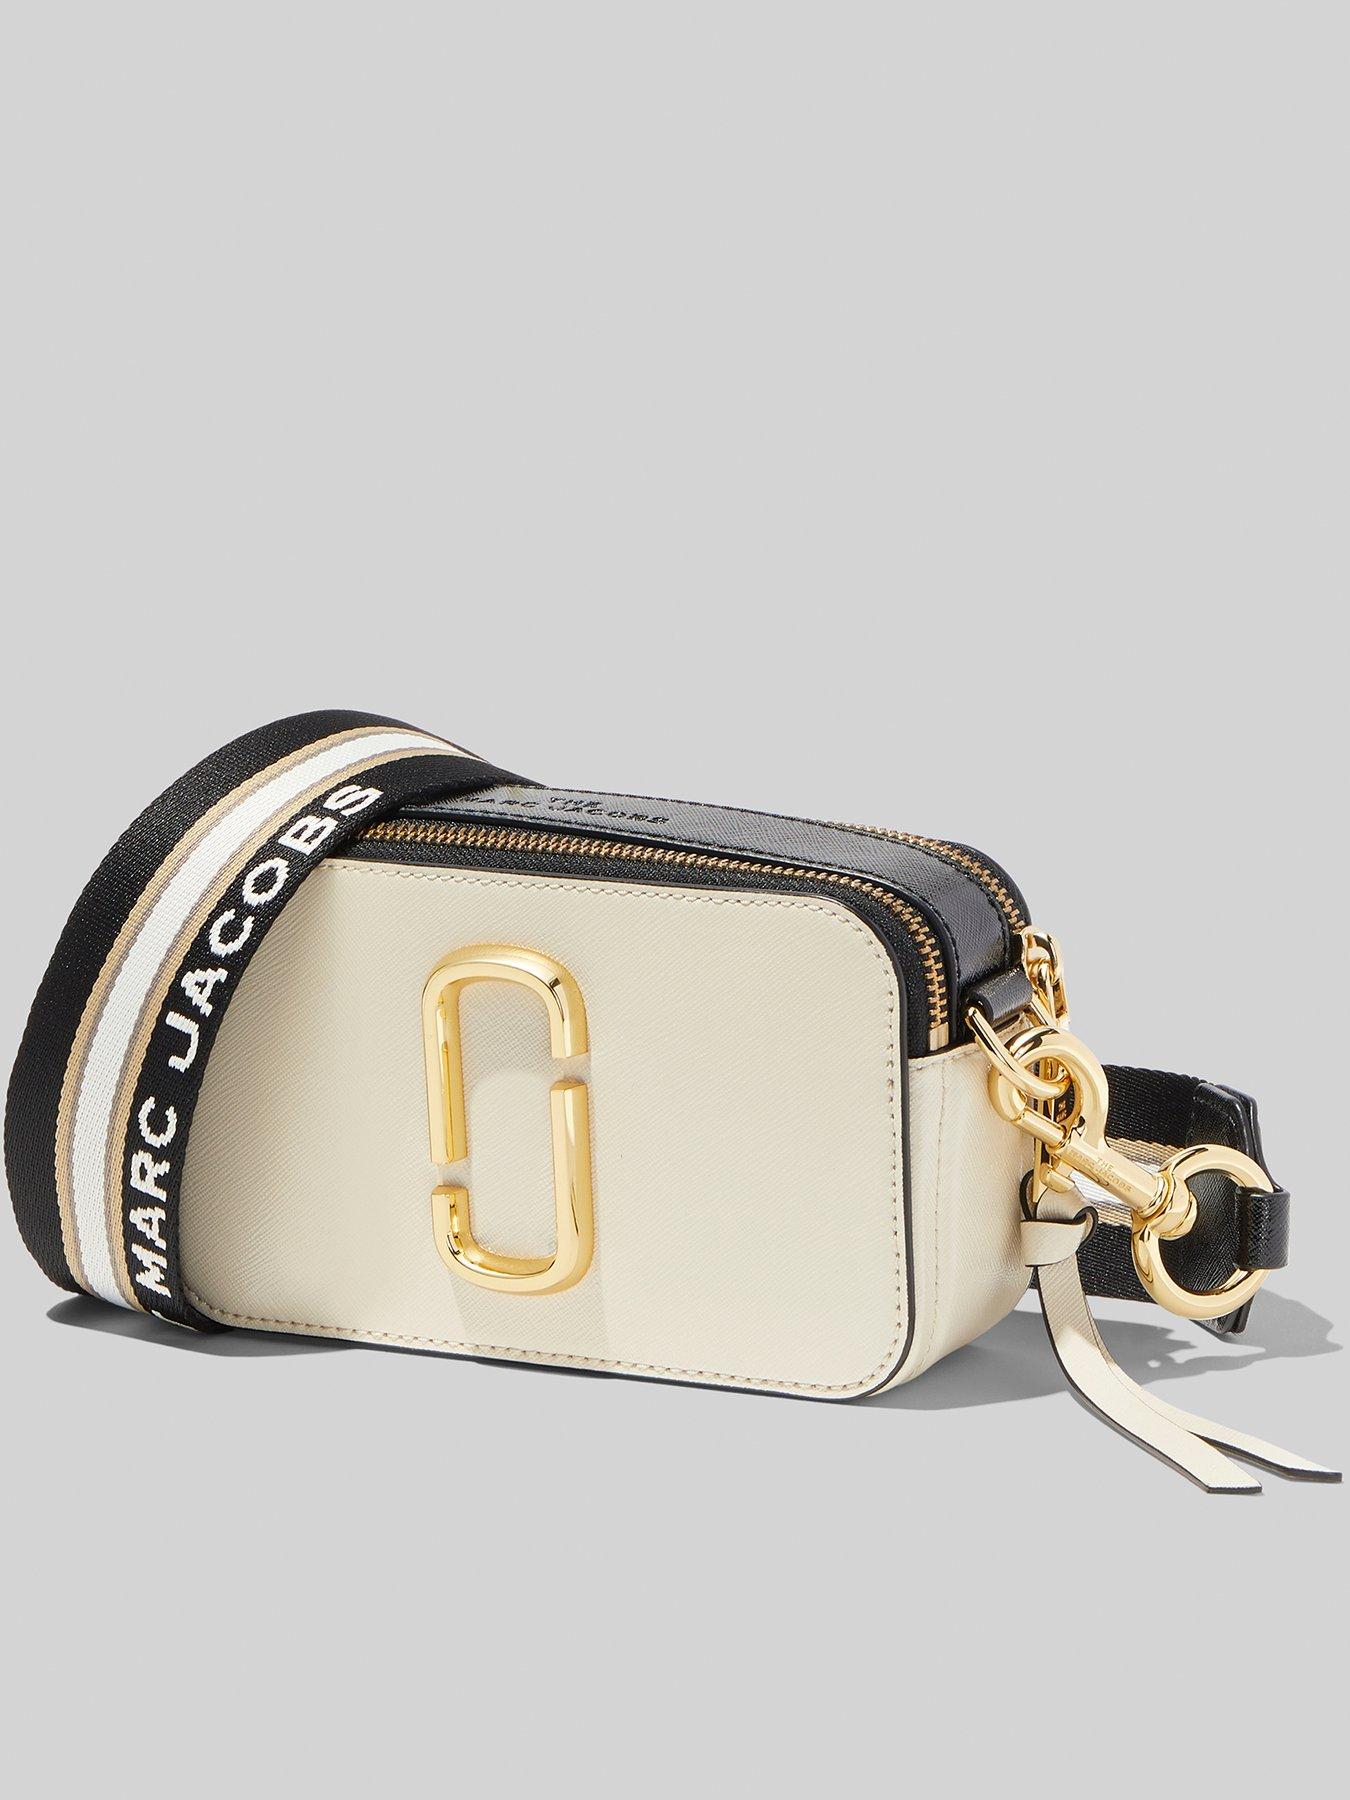 Marc Jacobs Snapshot Camera Bag SAVE UP TO 40 SURPRISE SALE